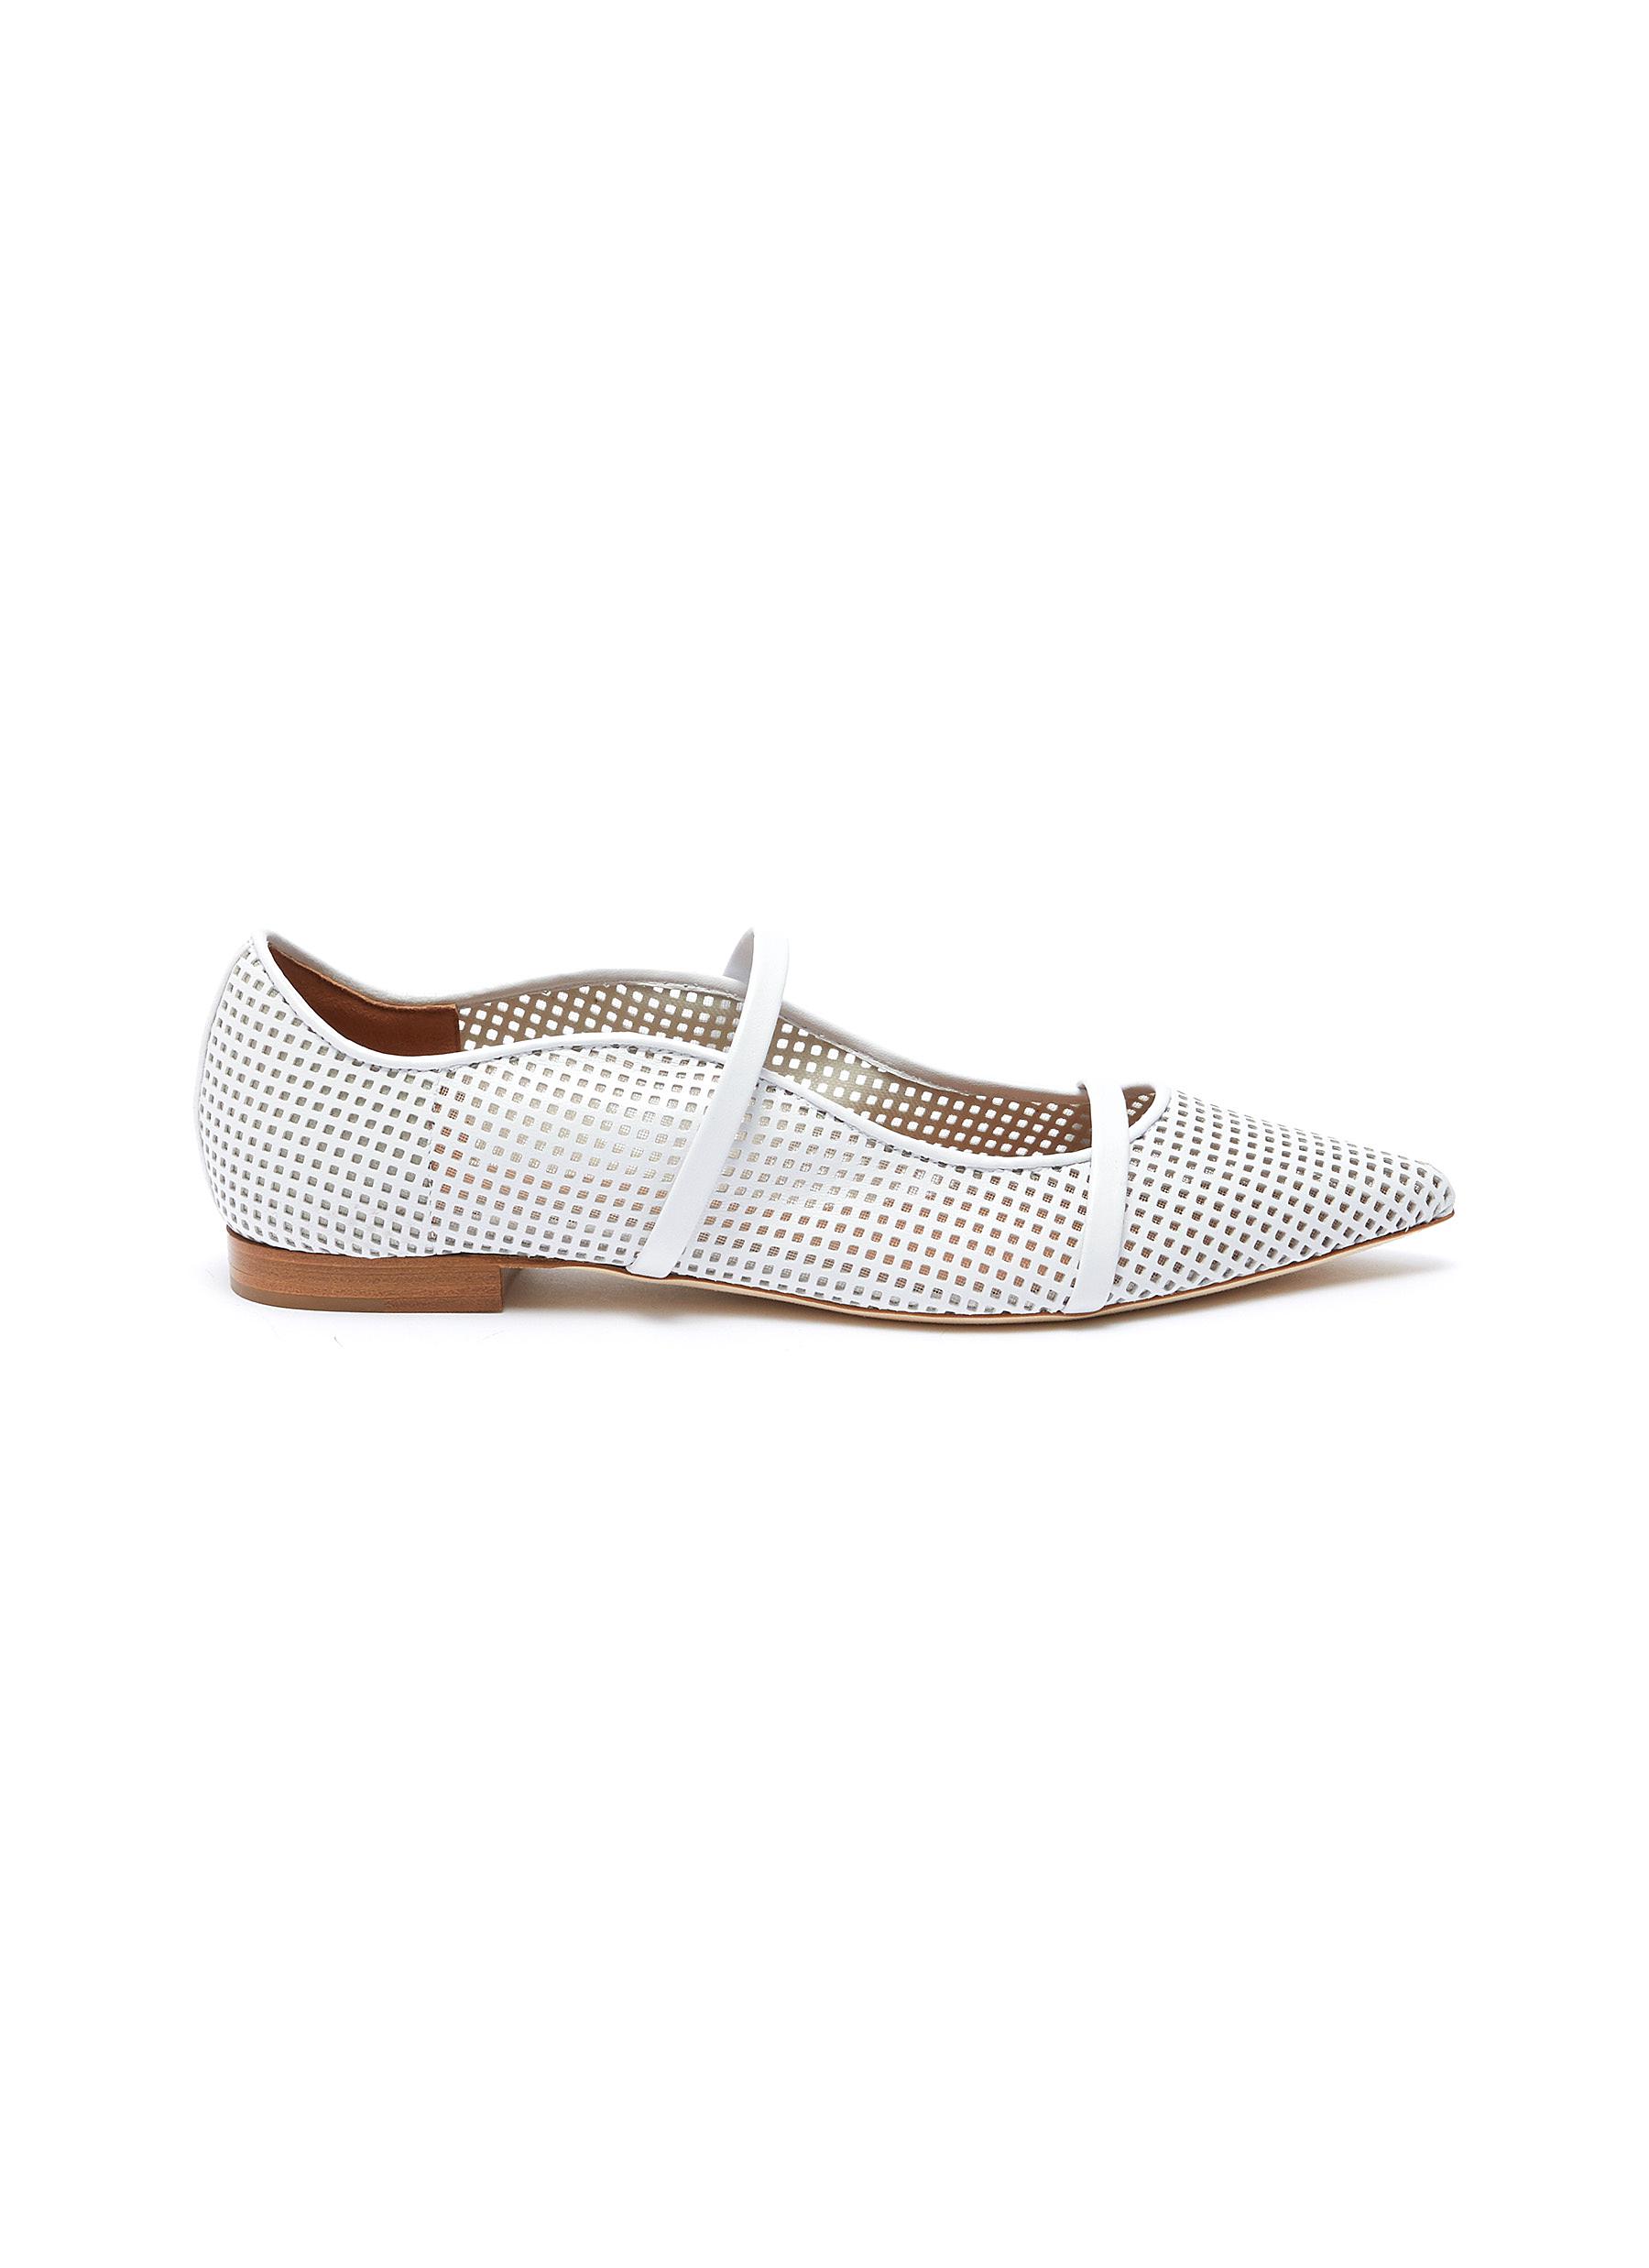 MALONE SOULIERS | Maureen perforated 